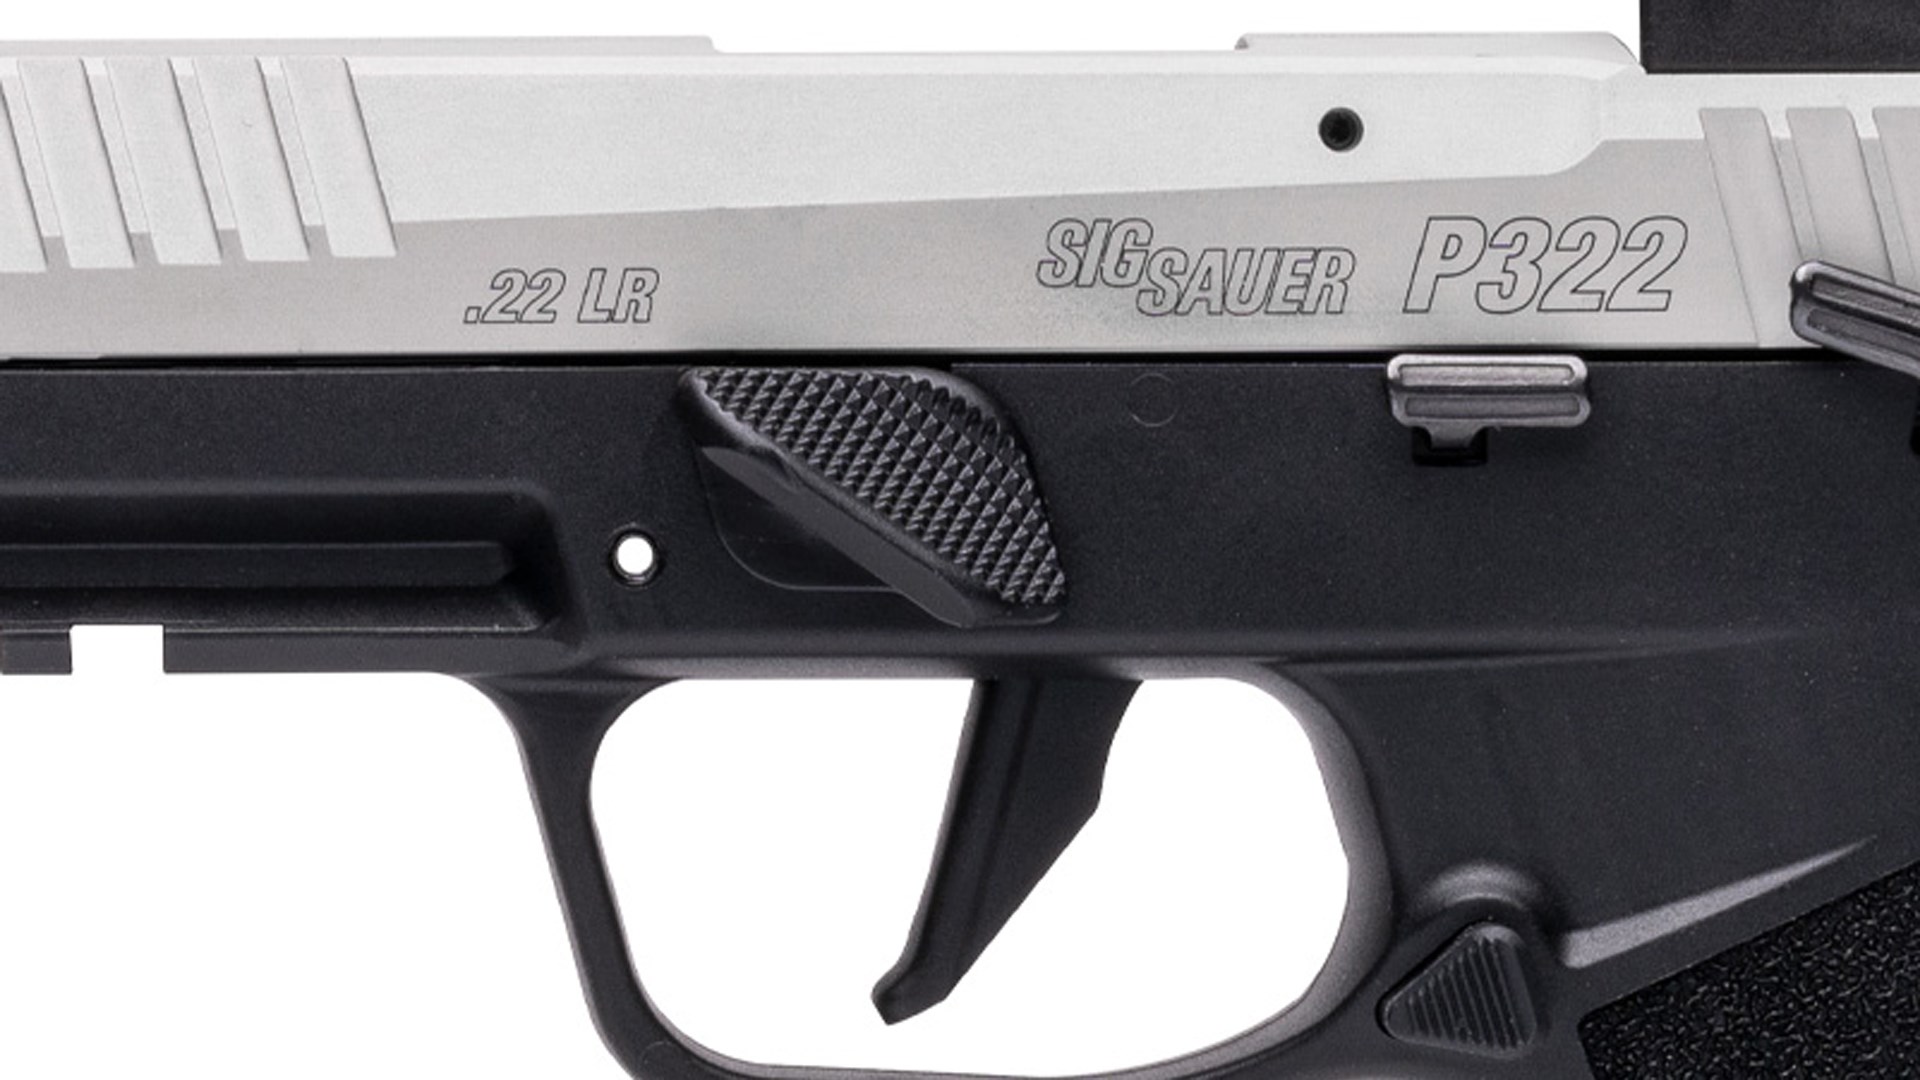 Thumb rest on the left side of the SIG Sauer P322-COMP pistol.